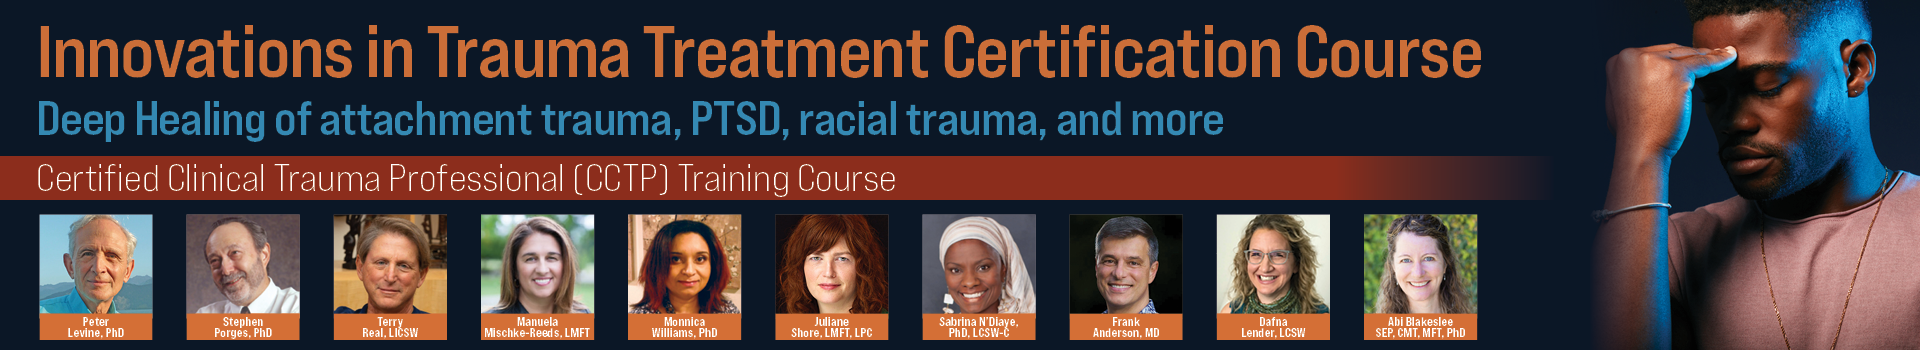 Innovations in Trauma Treatment Certification Course: Deep Healing of attachment trauma, PTSD, racial trauma, and more